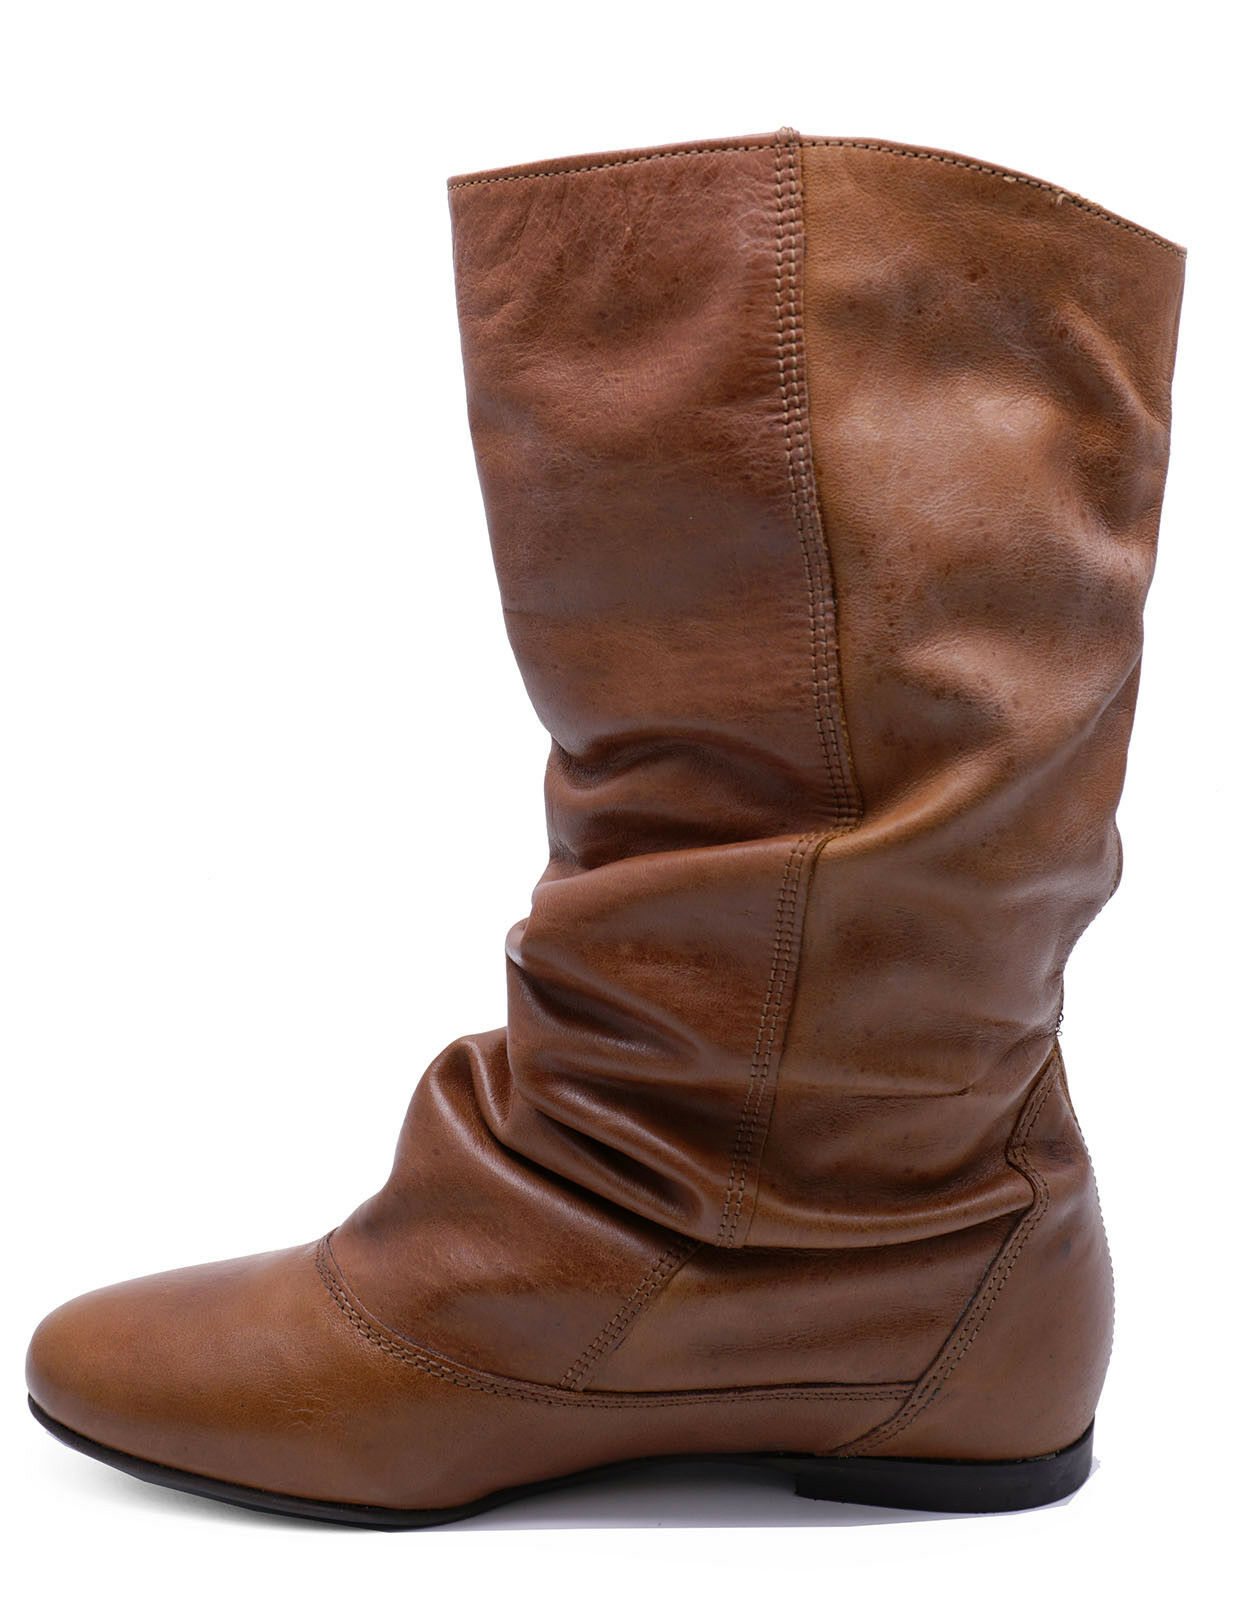 Ladies Real Leather Tan Flat Slouch Comfy Ruched Tall Knee High Calf Boots 3 8 Ebay